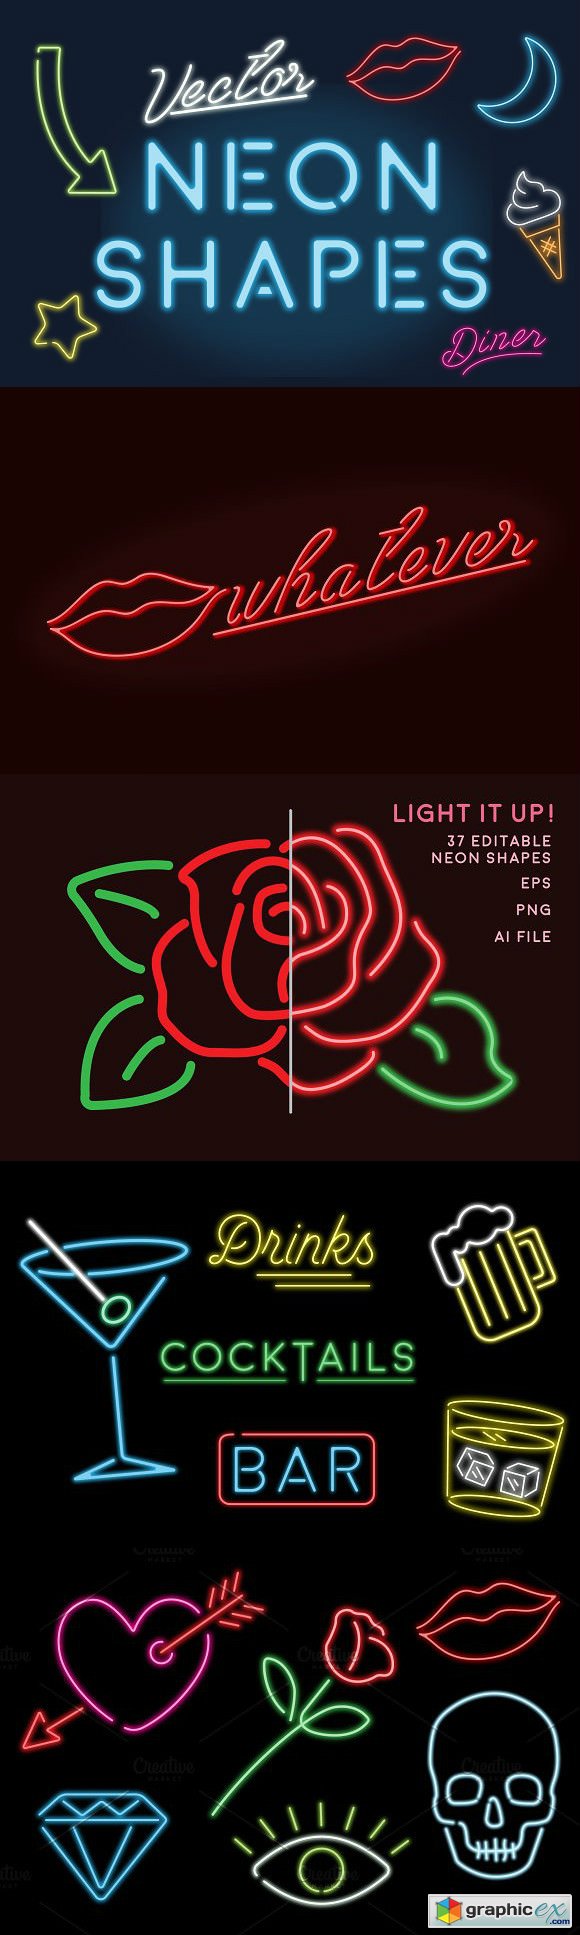 Neon Sign Shapes Vector Pack